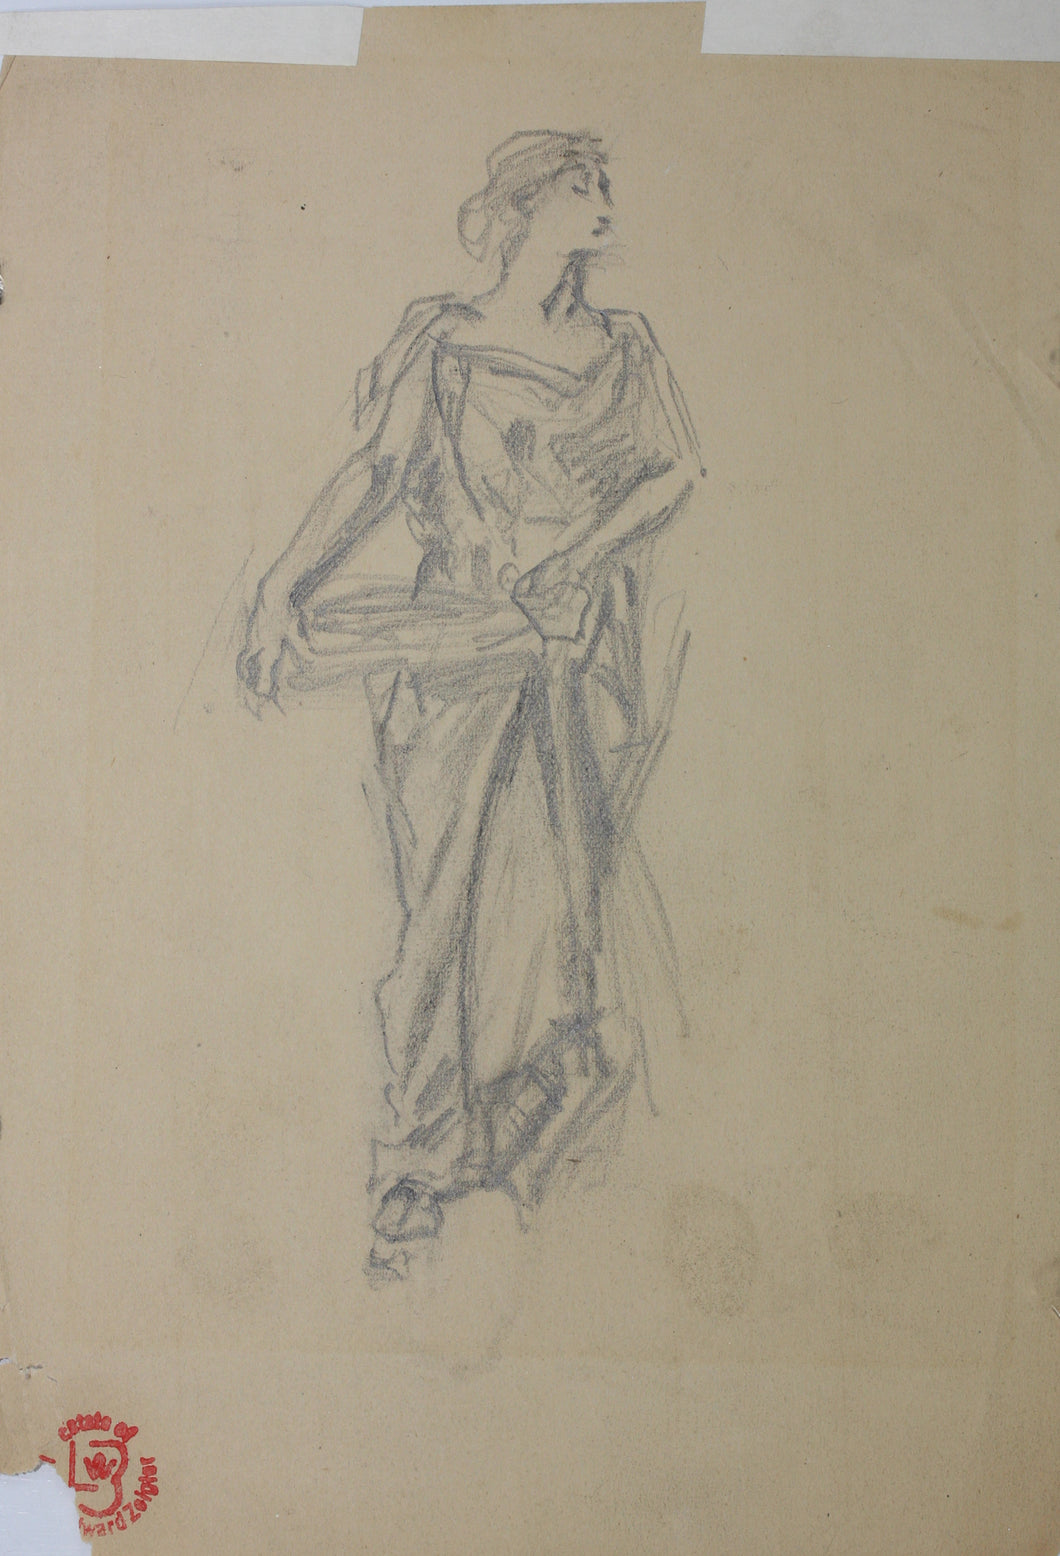 Lee Woodward Zeigler. Female figure with a tray in antique attire. Graphite drawing. XX C.